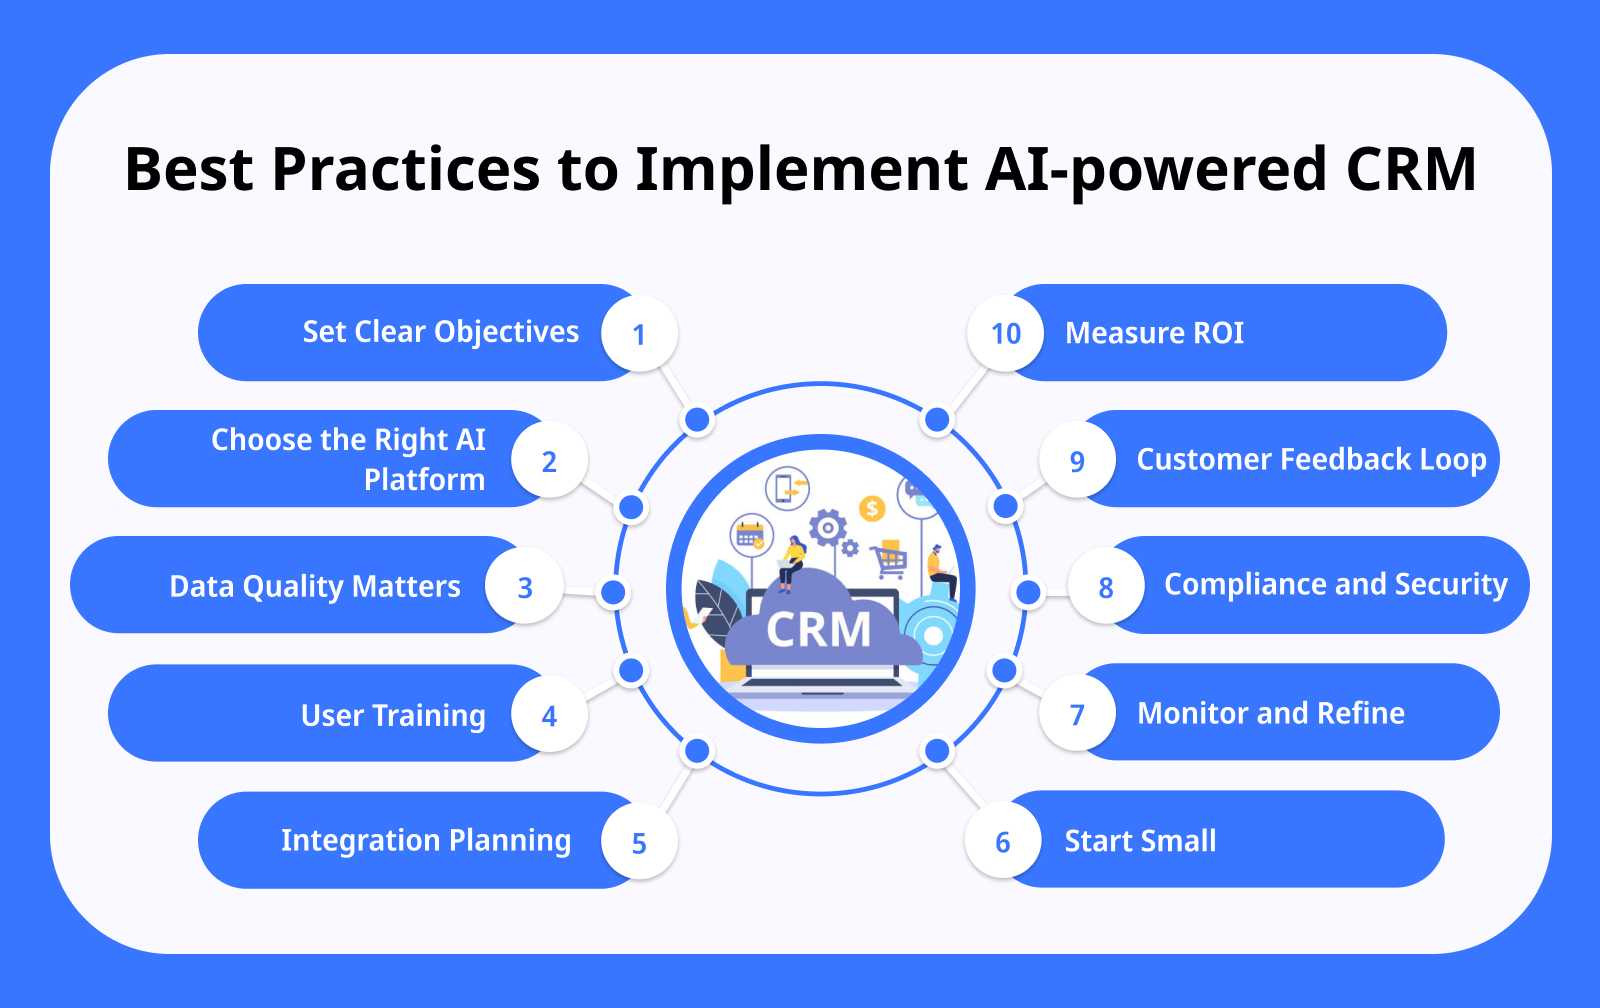 Best Practices to Implement AI powered CRM